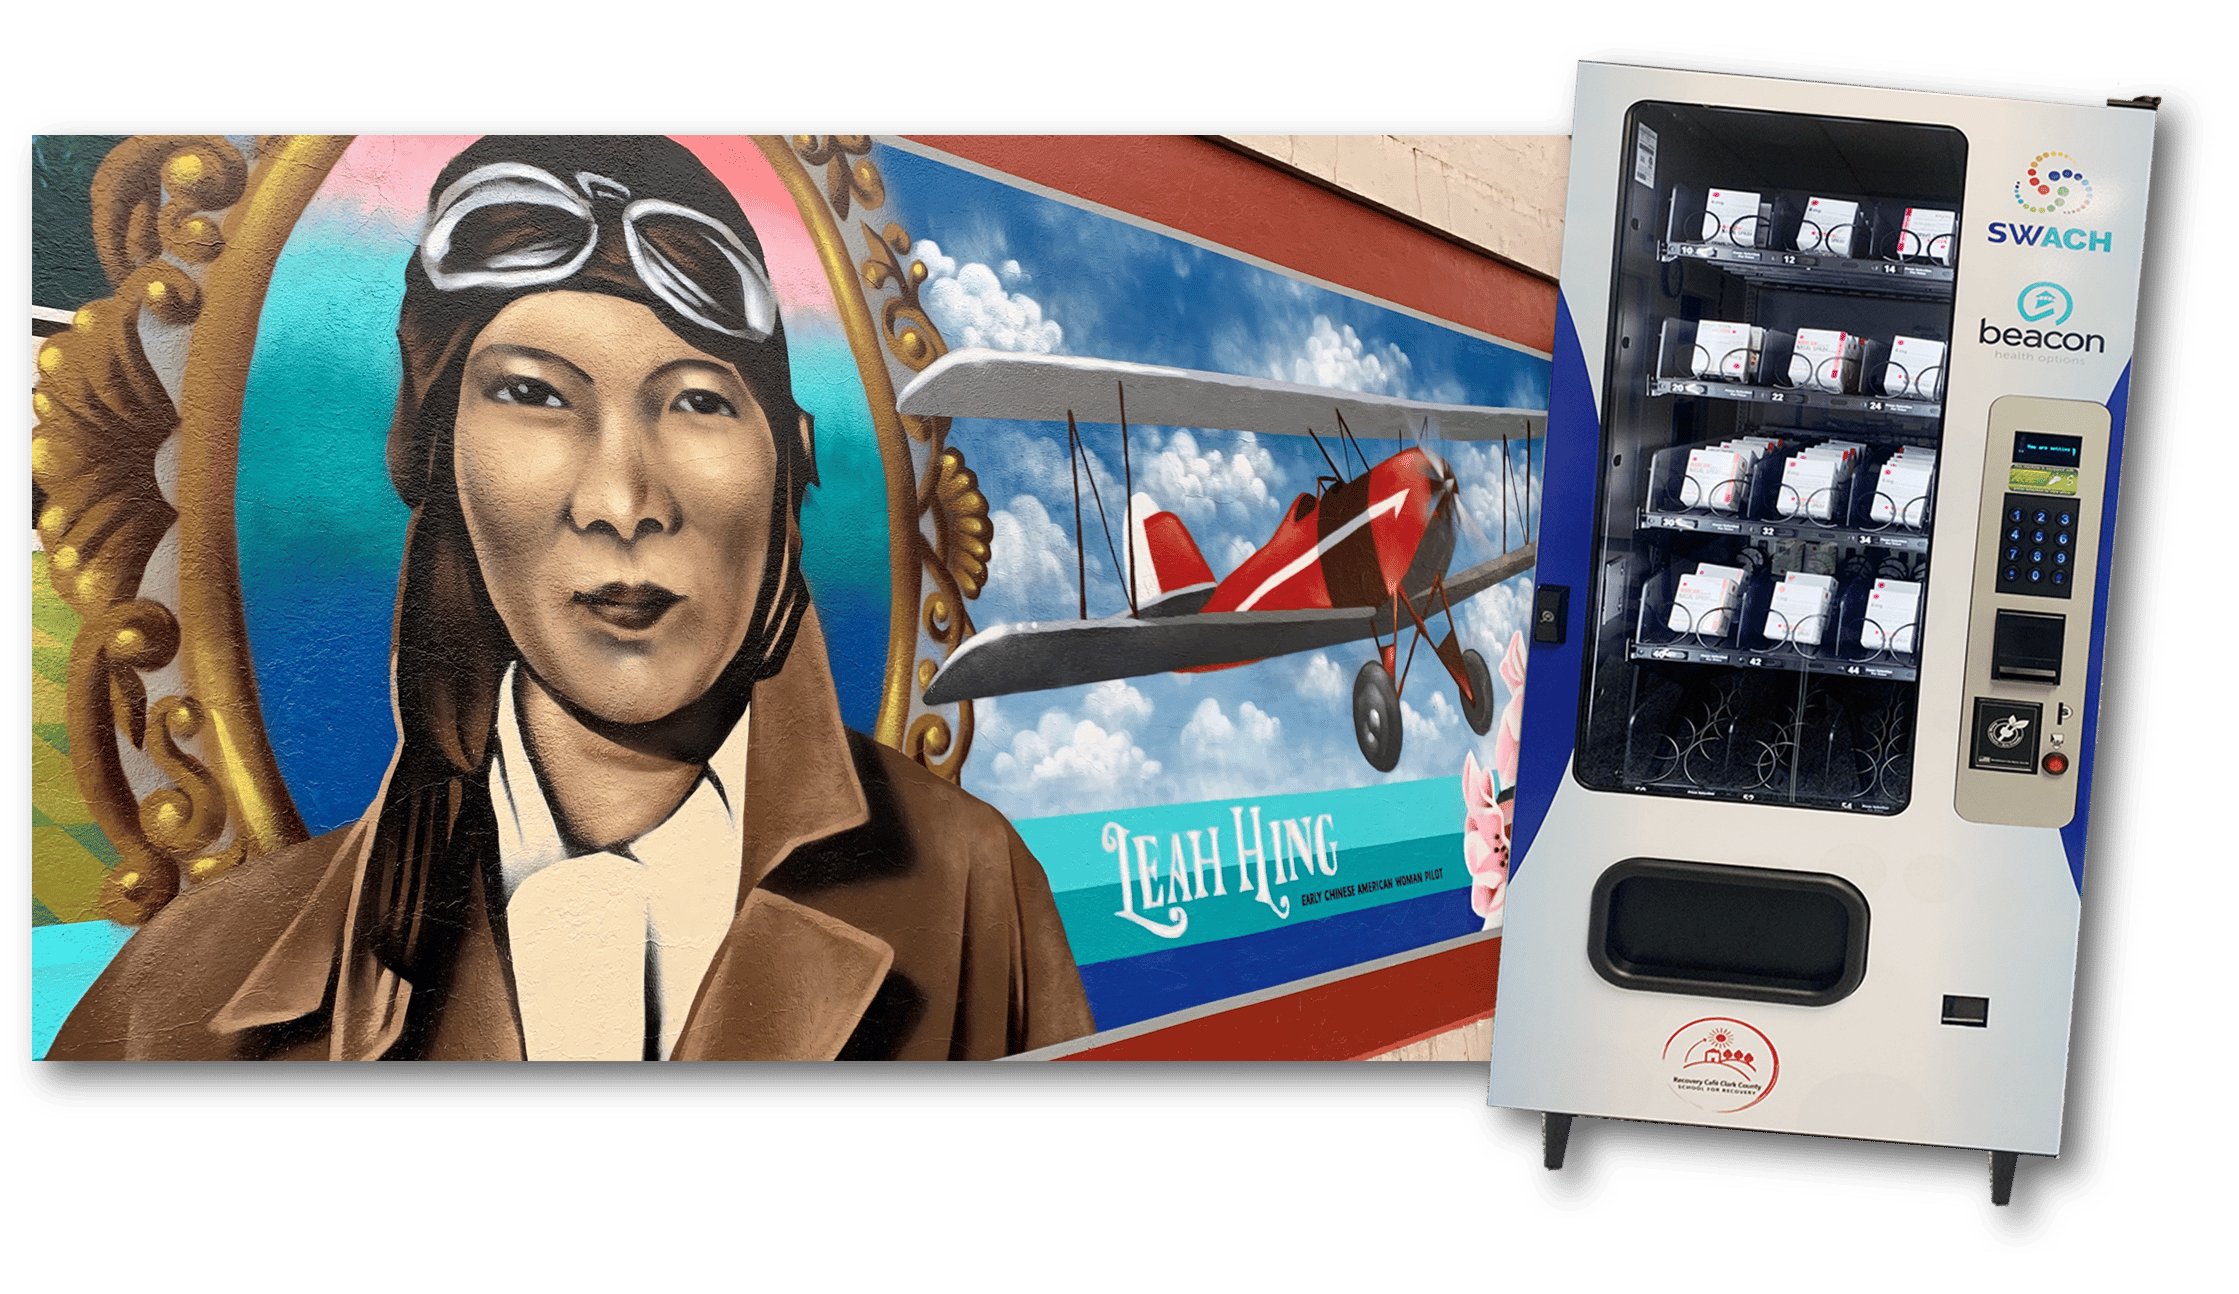 A mural painting of Leah Hing and a historic airplane; a vending machine